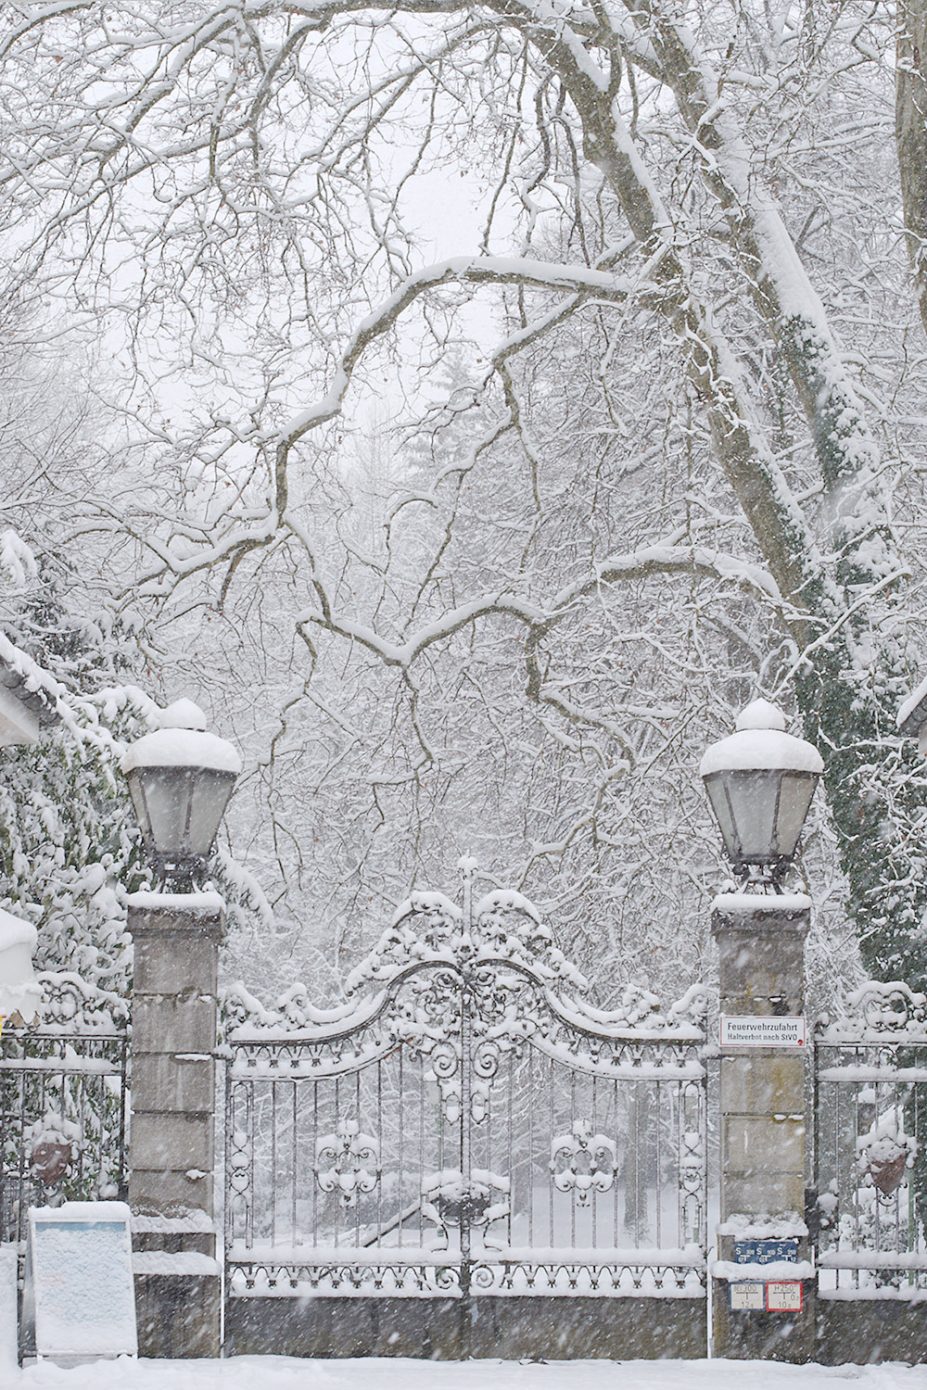 The glorious Past in Snow. Tagged with 